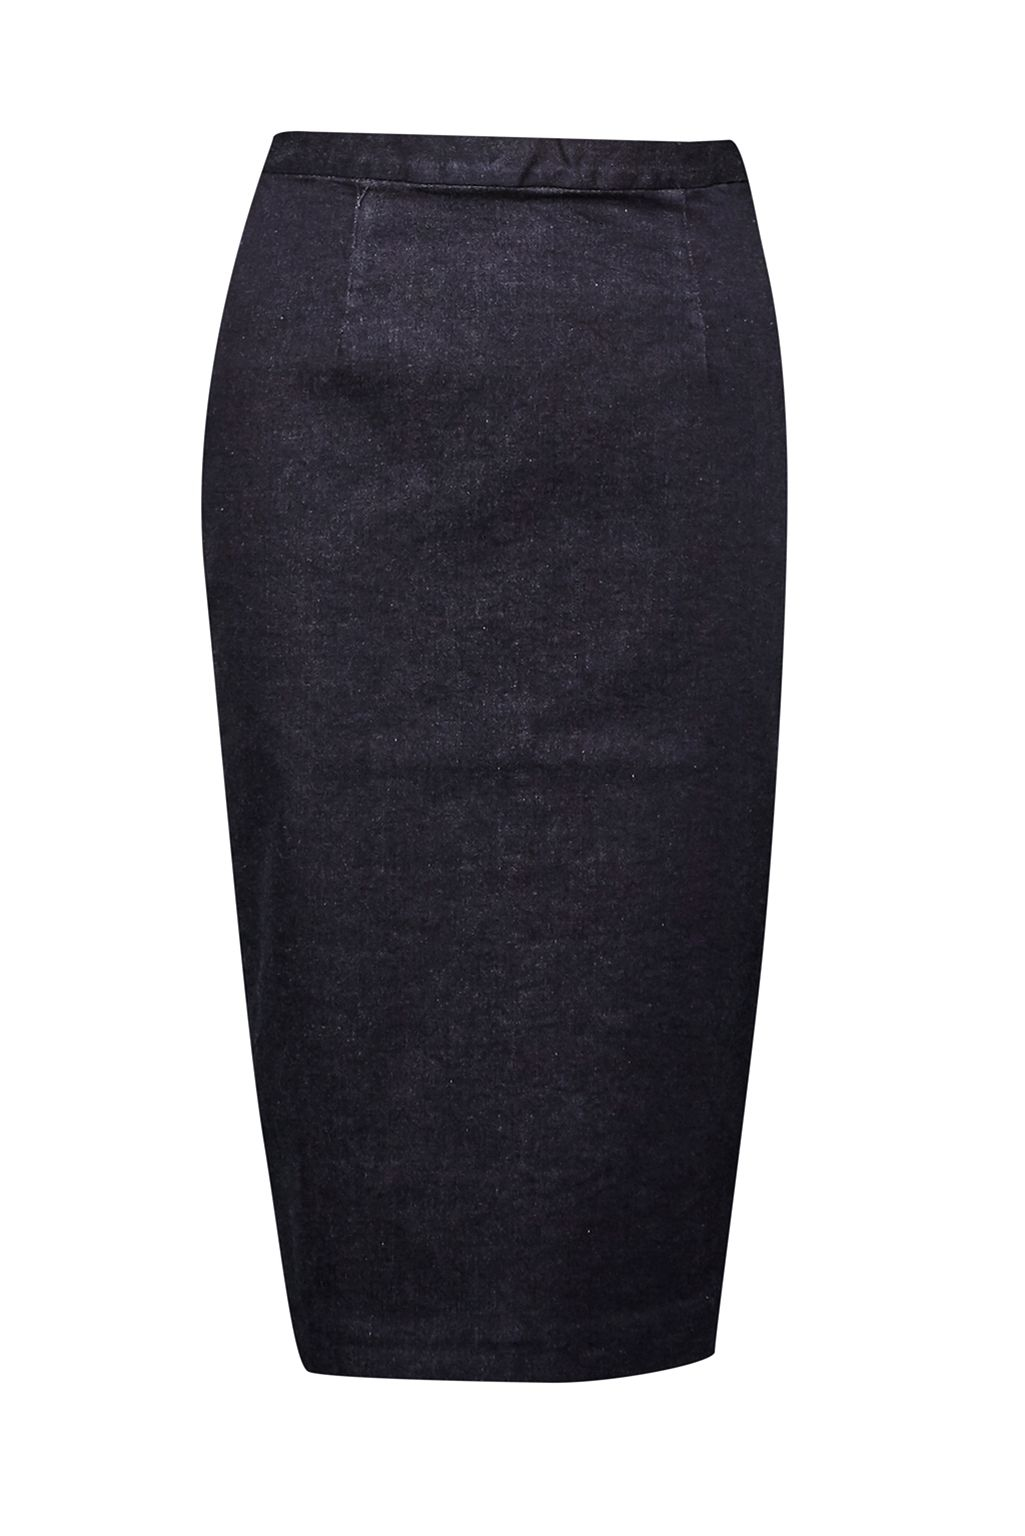 French connection Svelte Denim Pencil Skirt in Black - Save 50% | Lyst